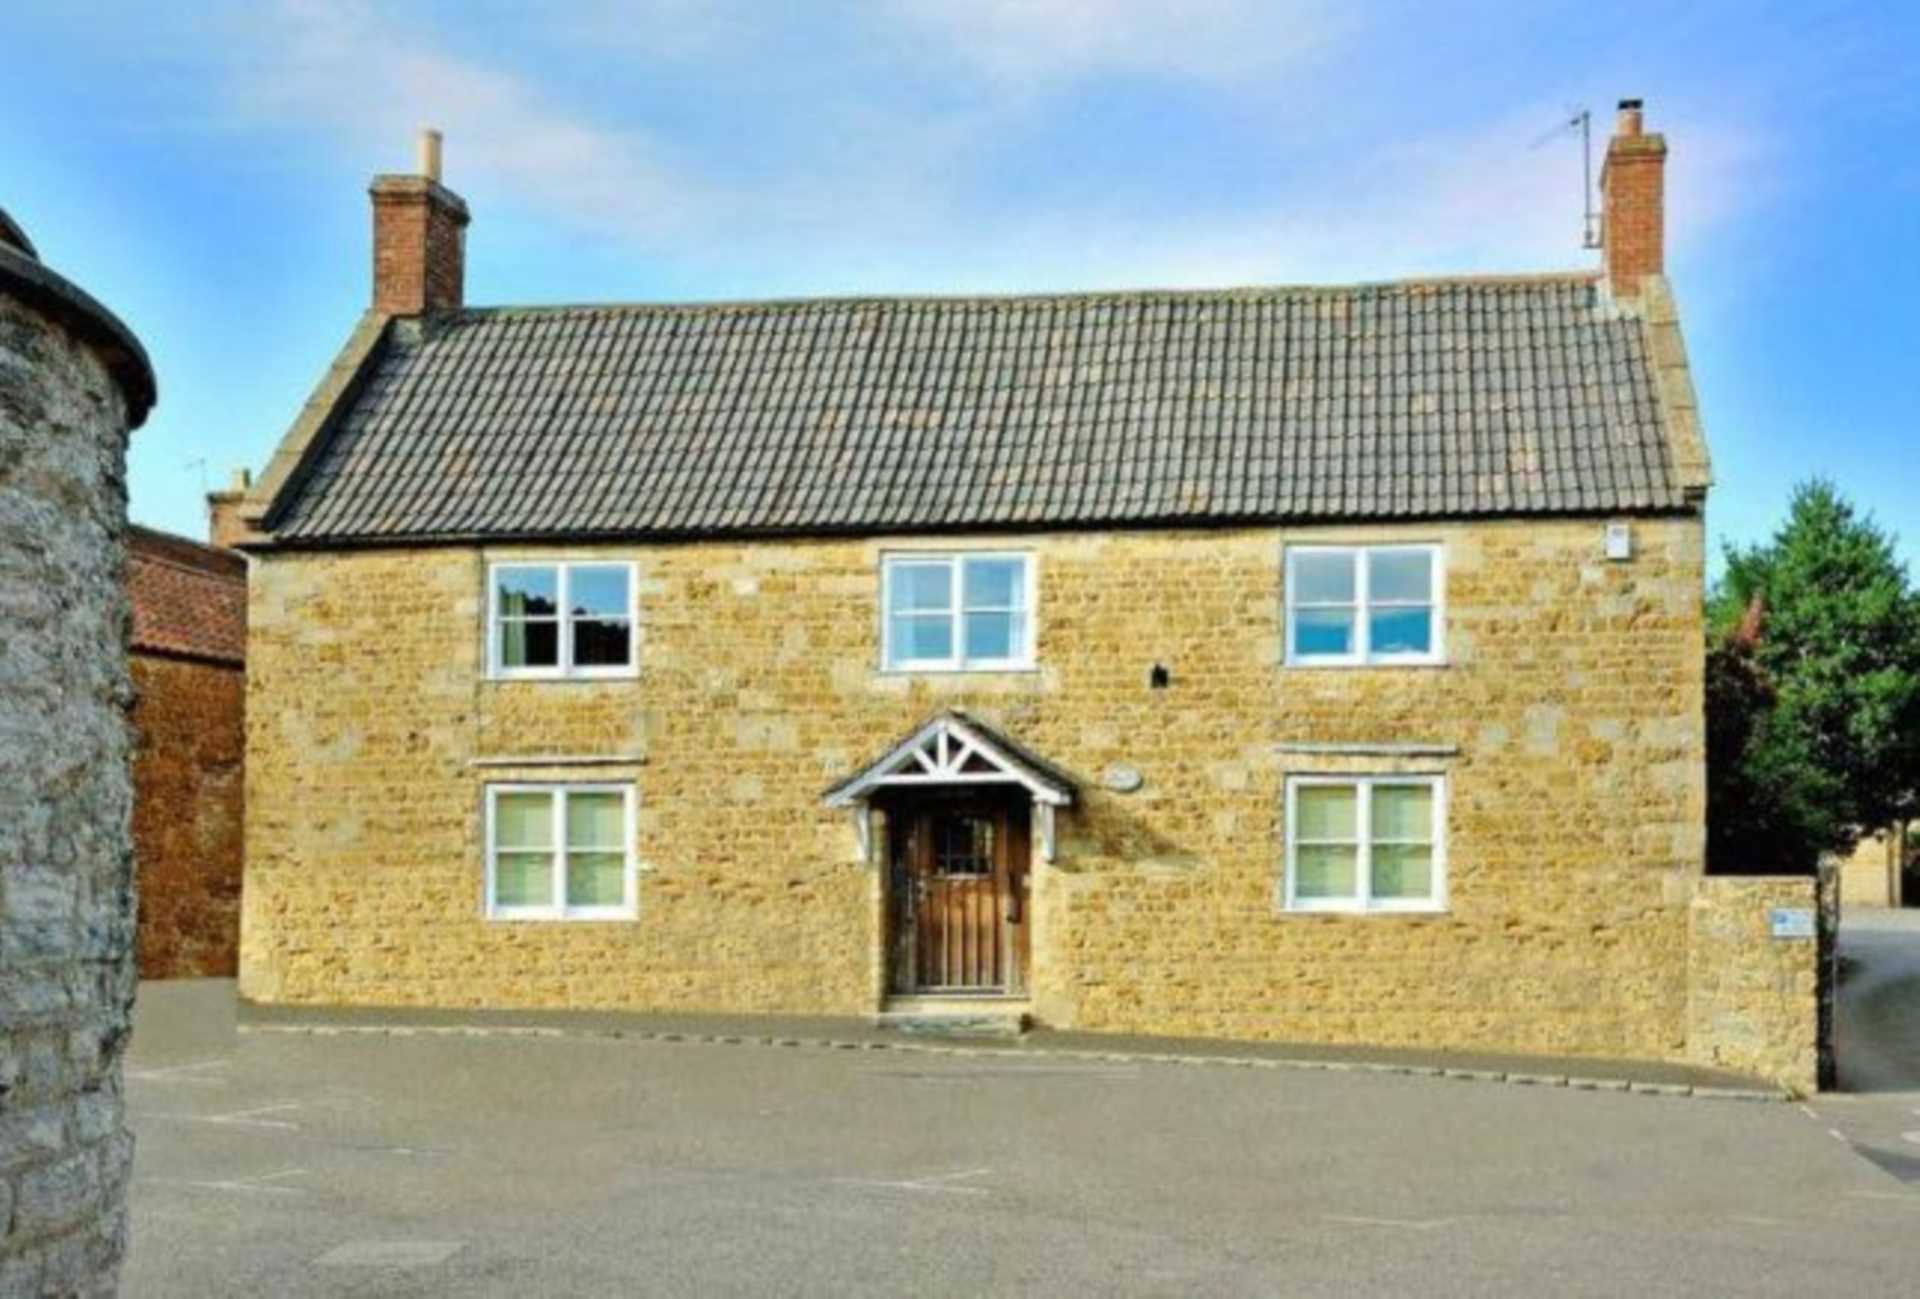 6 bed Detached House for rent in Castle Cary. From Swallows Property Letting - Frome